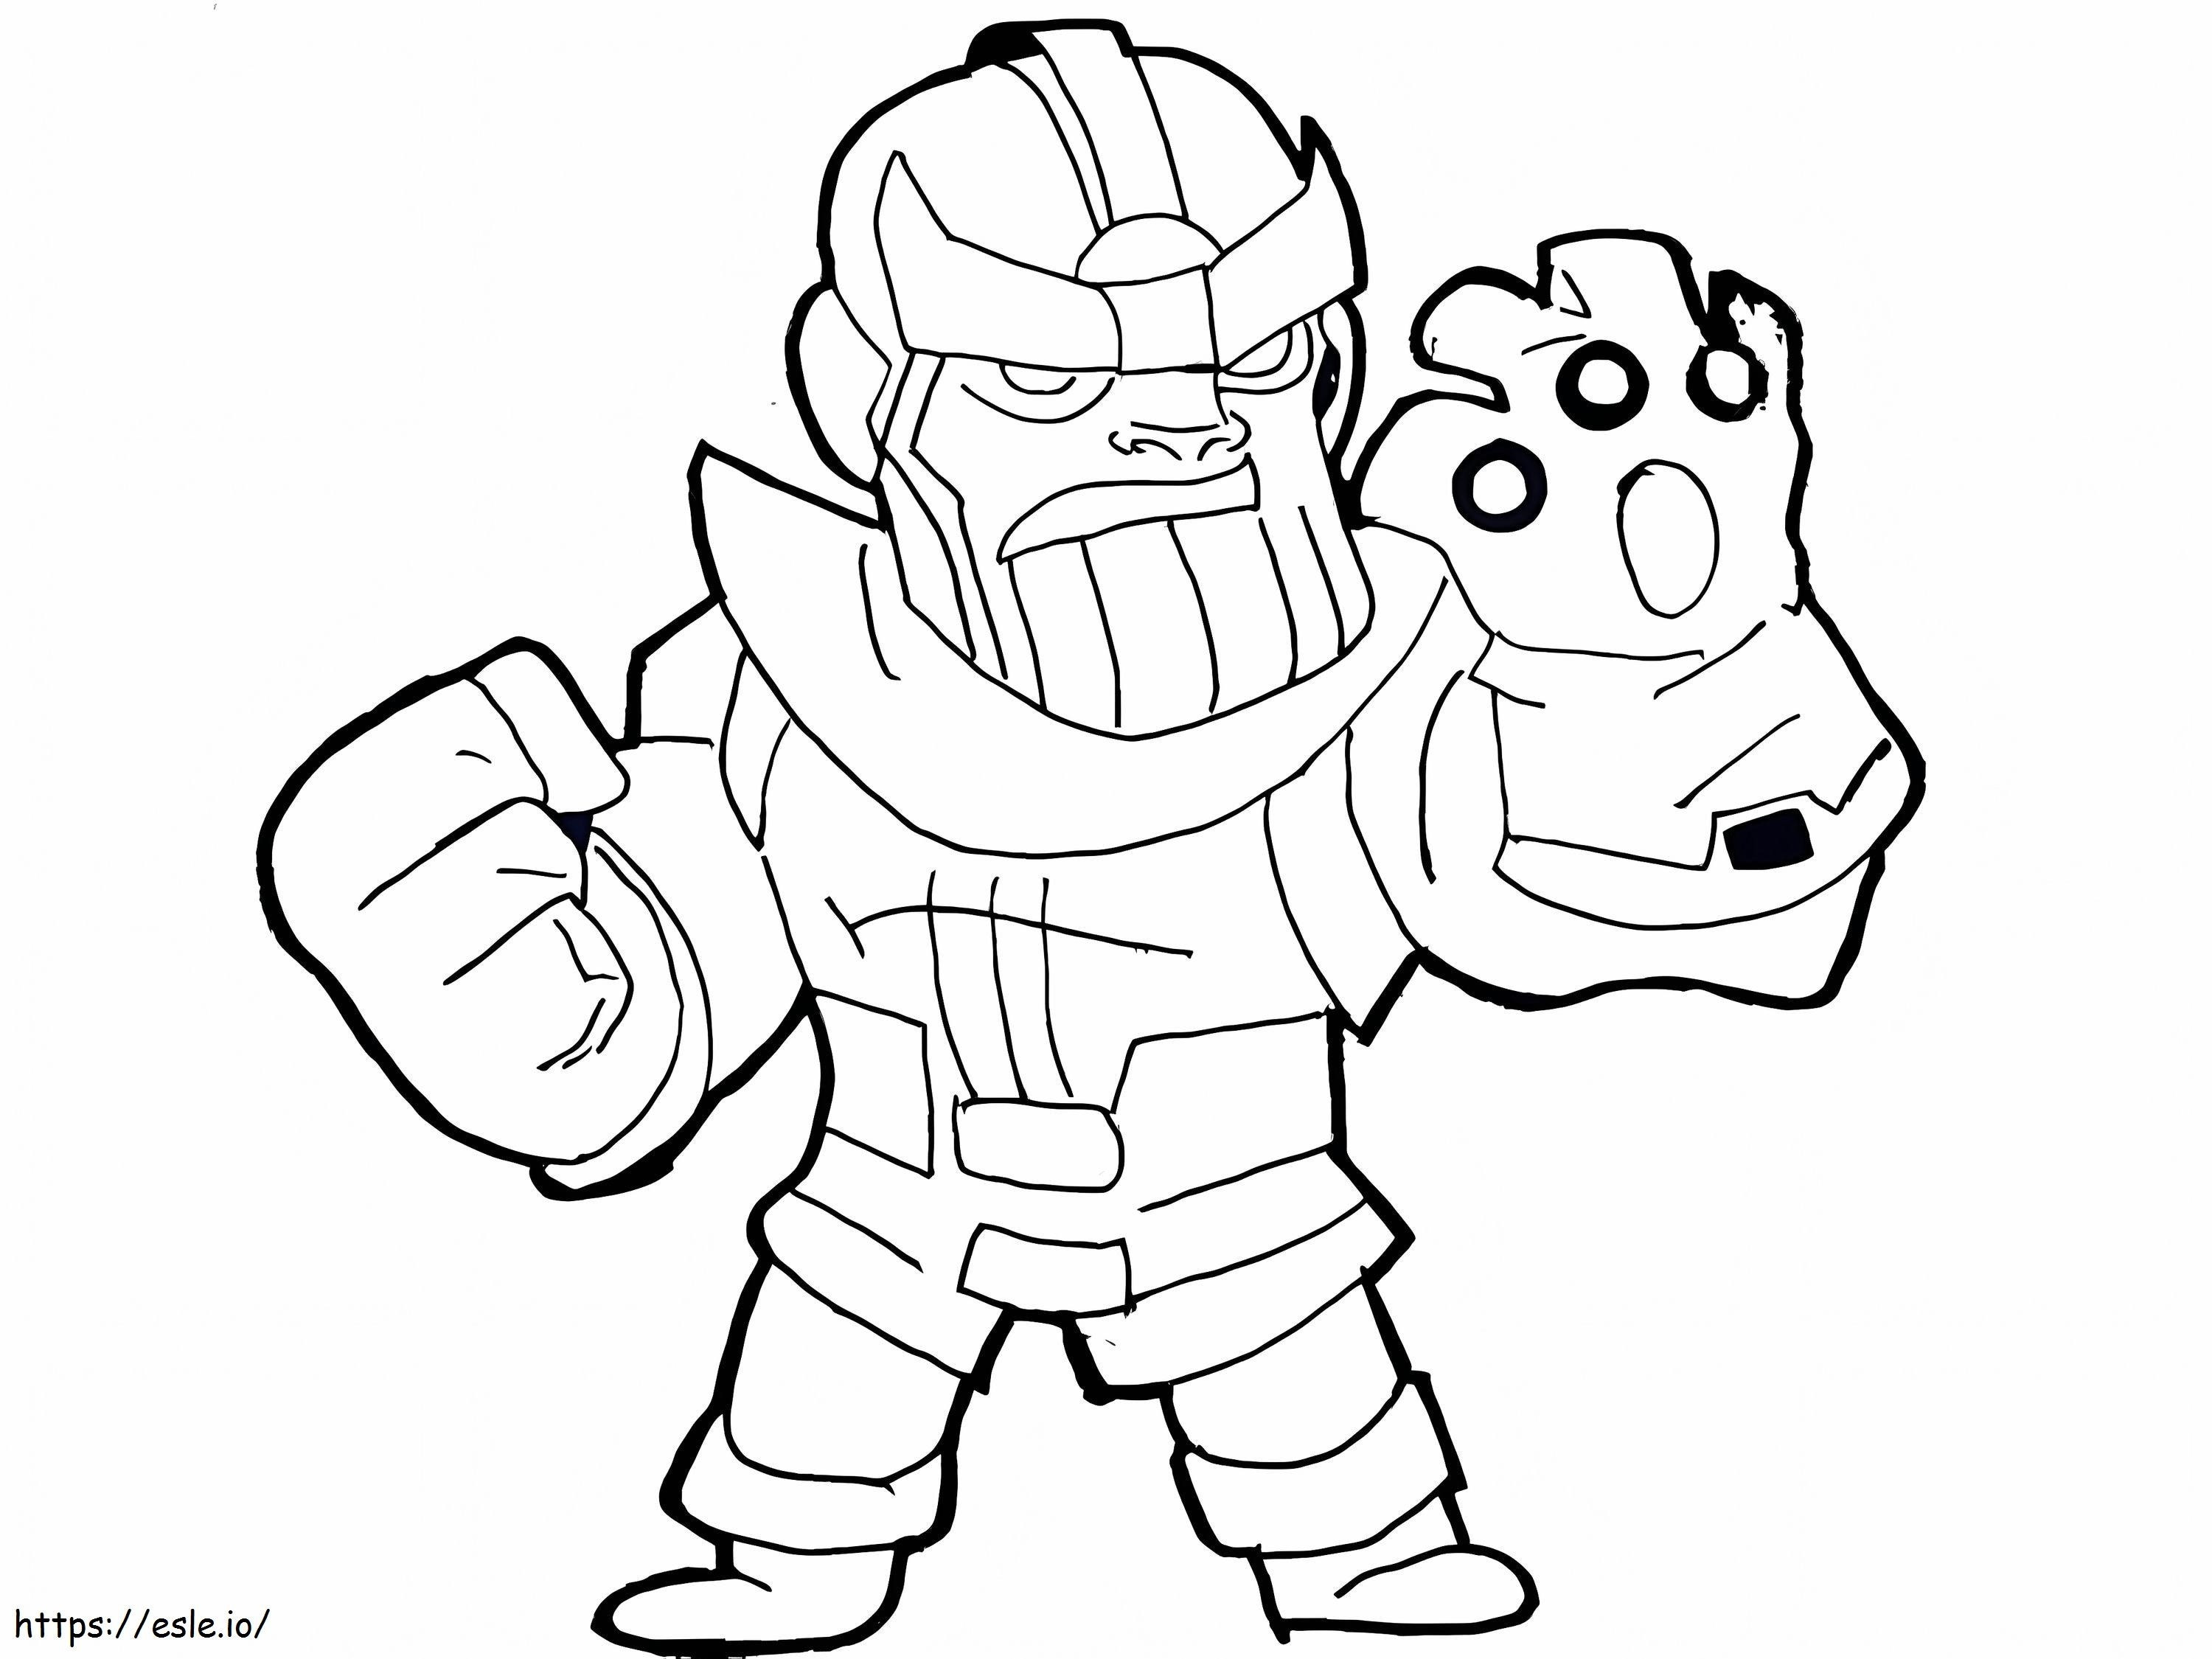 Cute Chibi Thanos Using Infinity Gauntlet coloring page